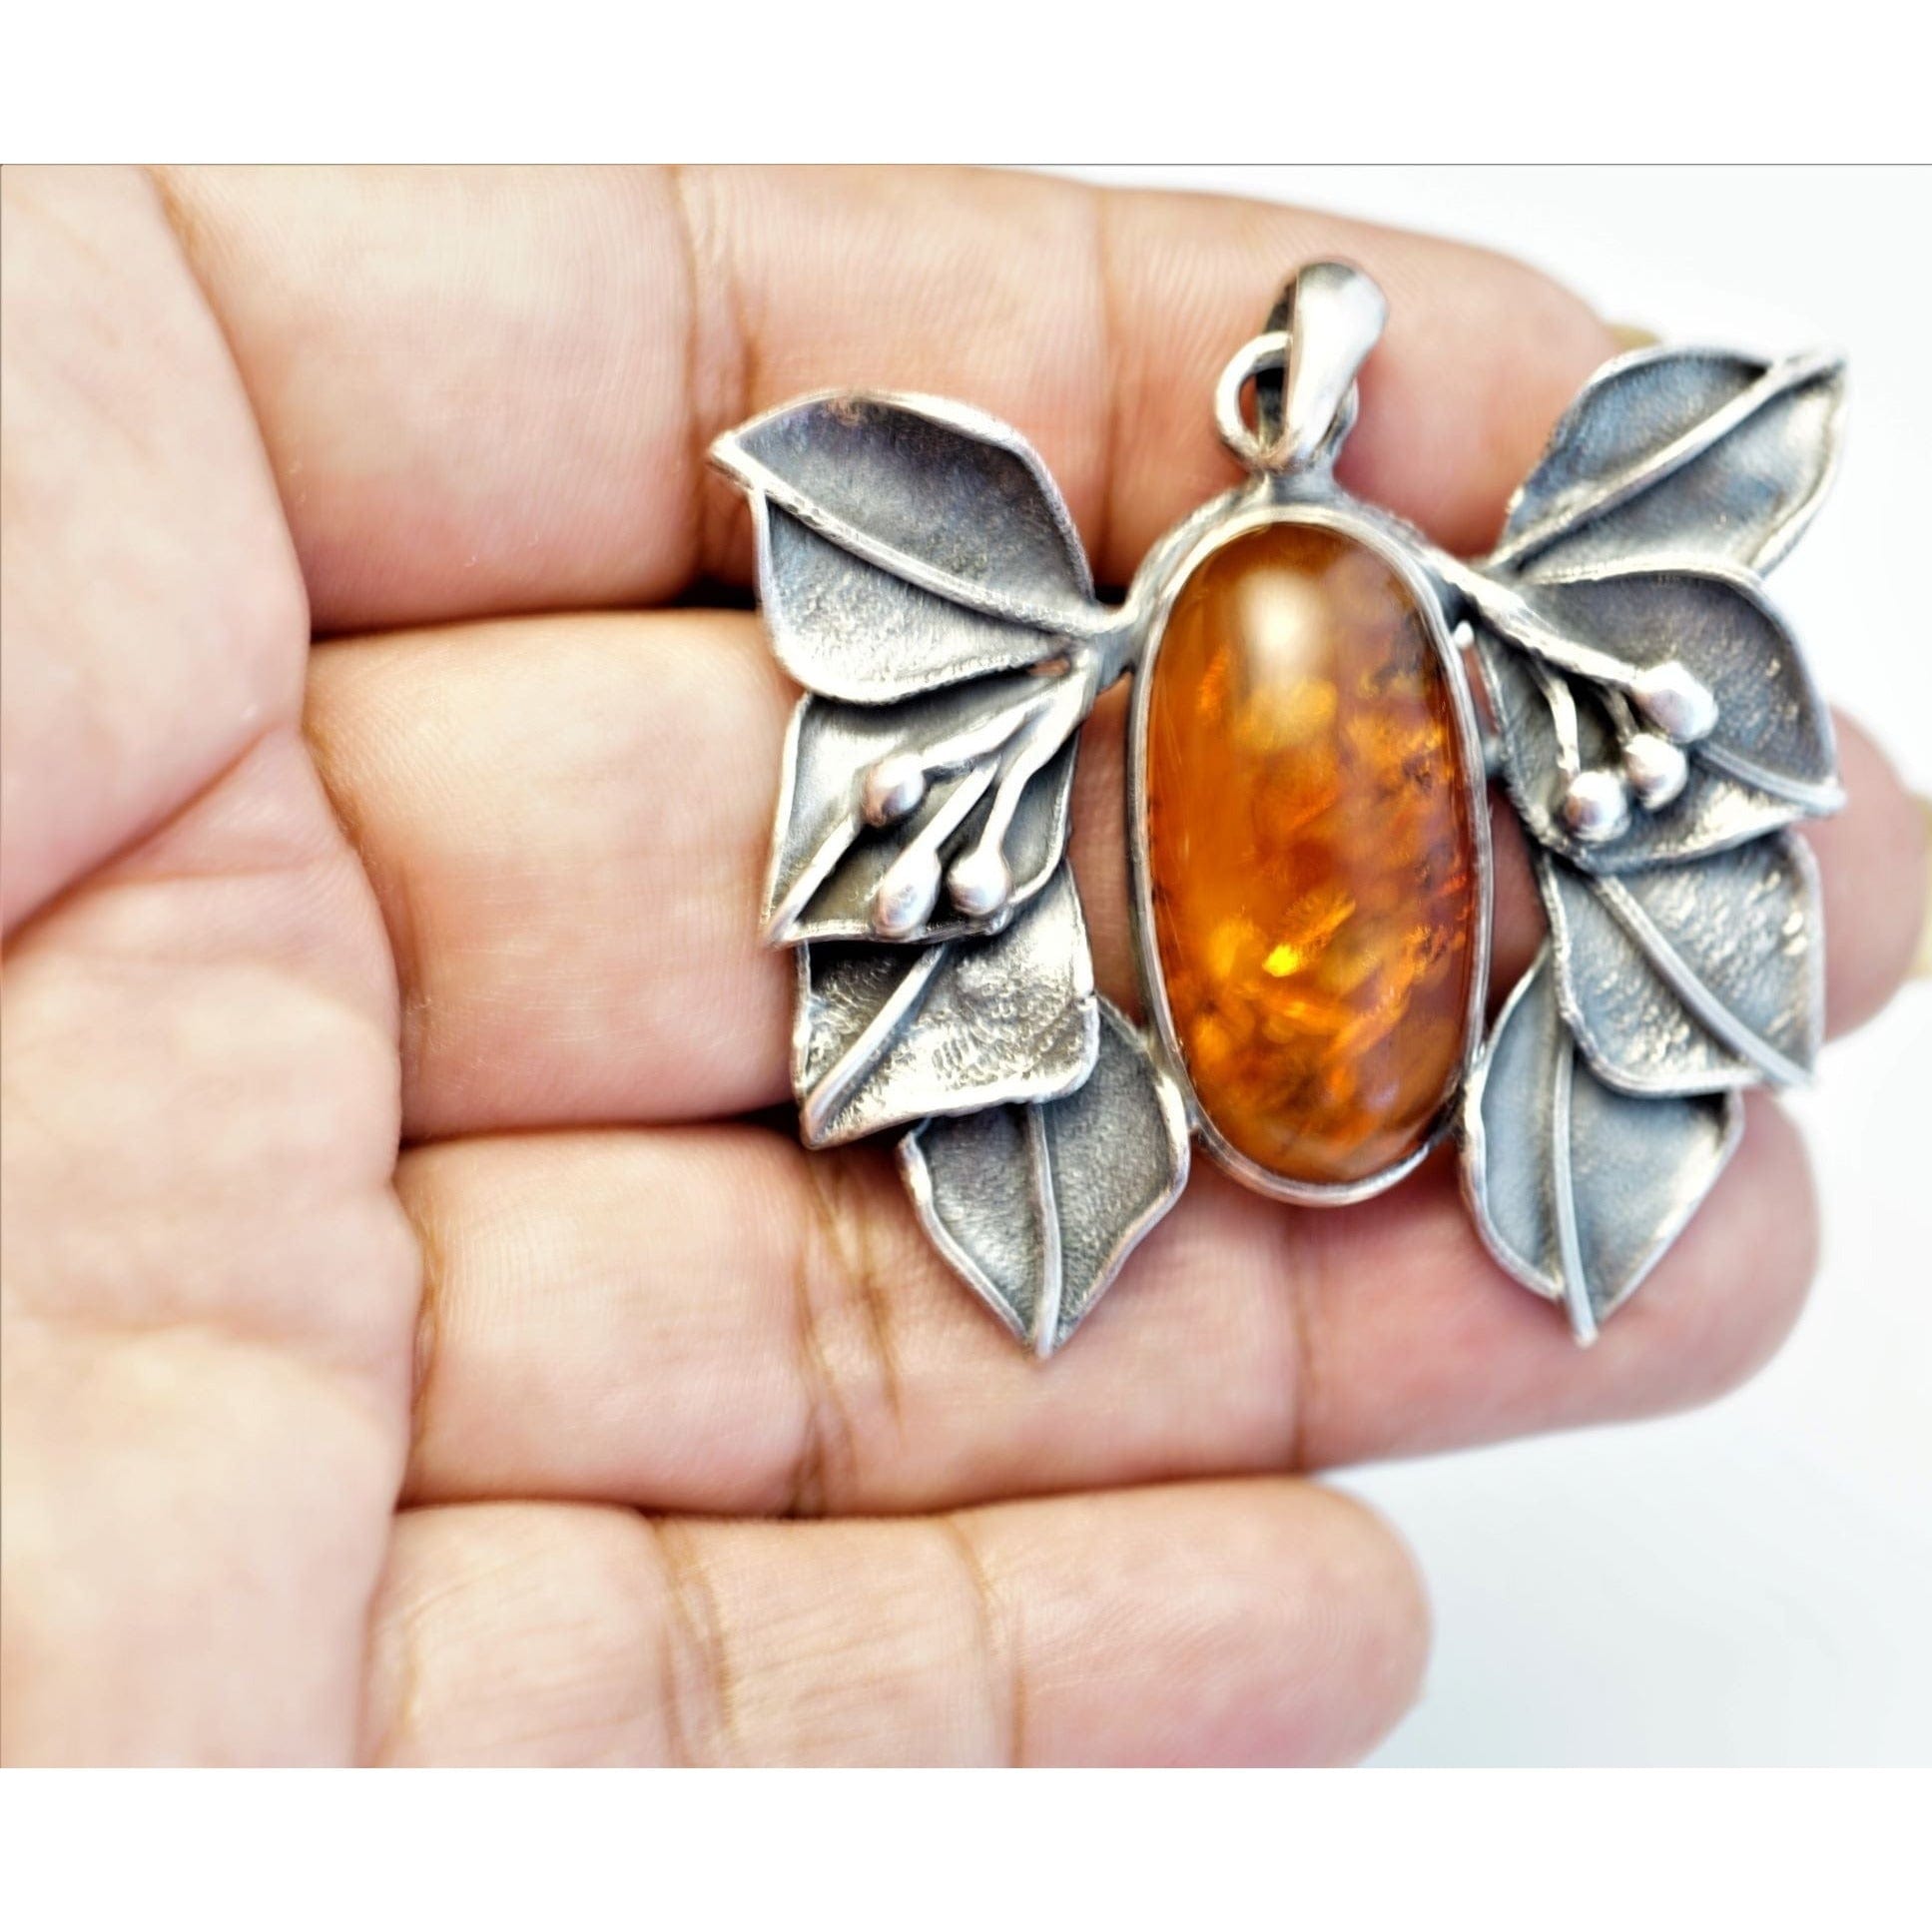 FJL Jewelry 925 sterling silver necklace SOLD!Large Amber Butterfly Sterling Silver Vintage Pendant, Natural Baltic Natural Oblong Shape Unique Open Wings